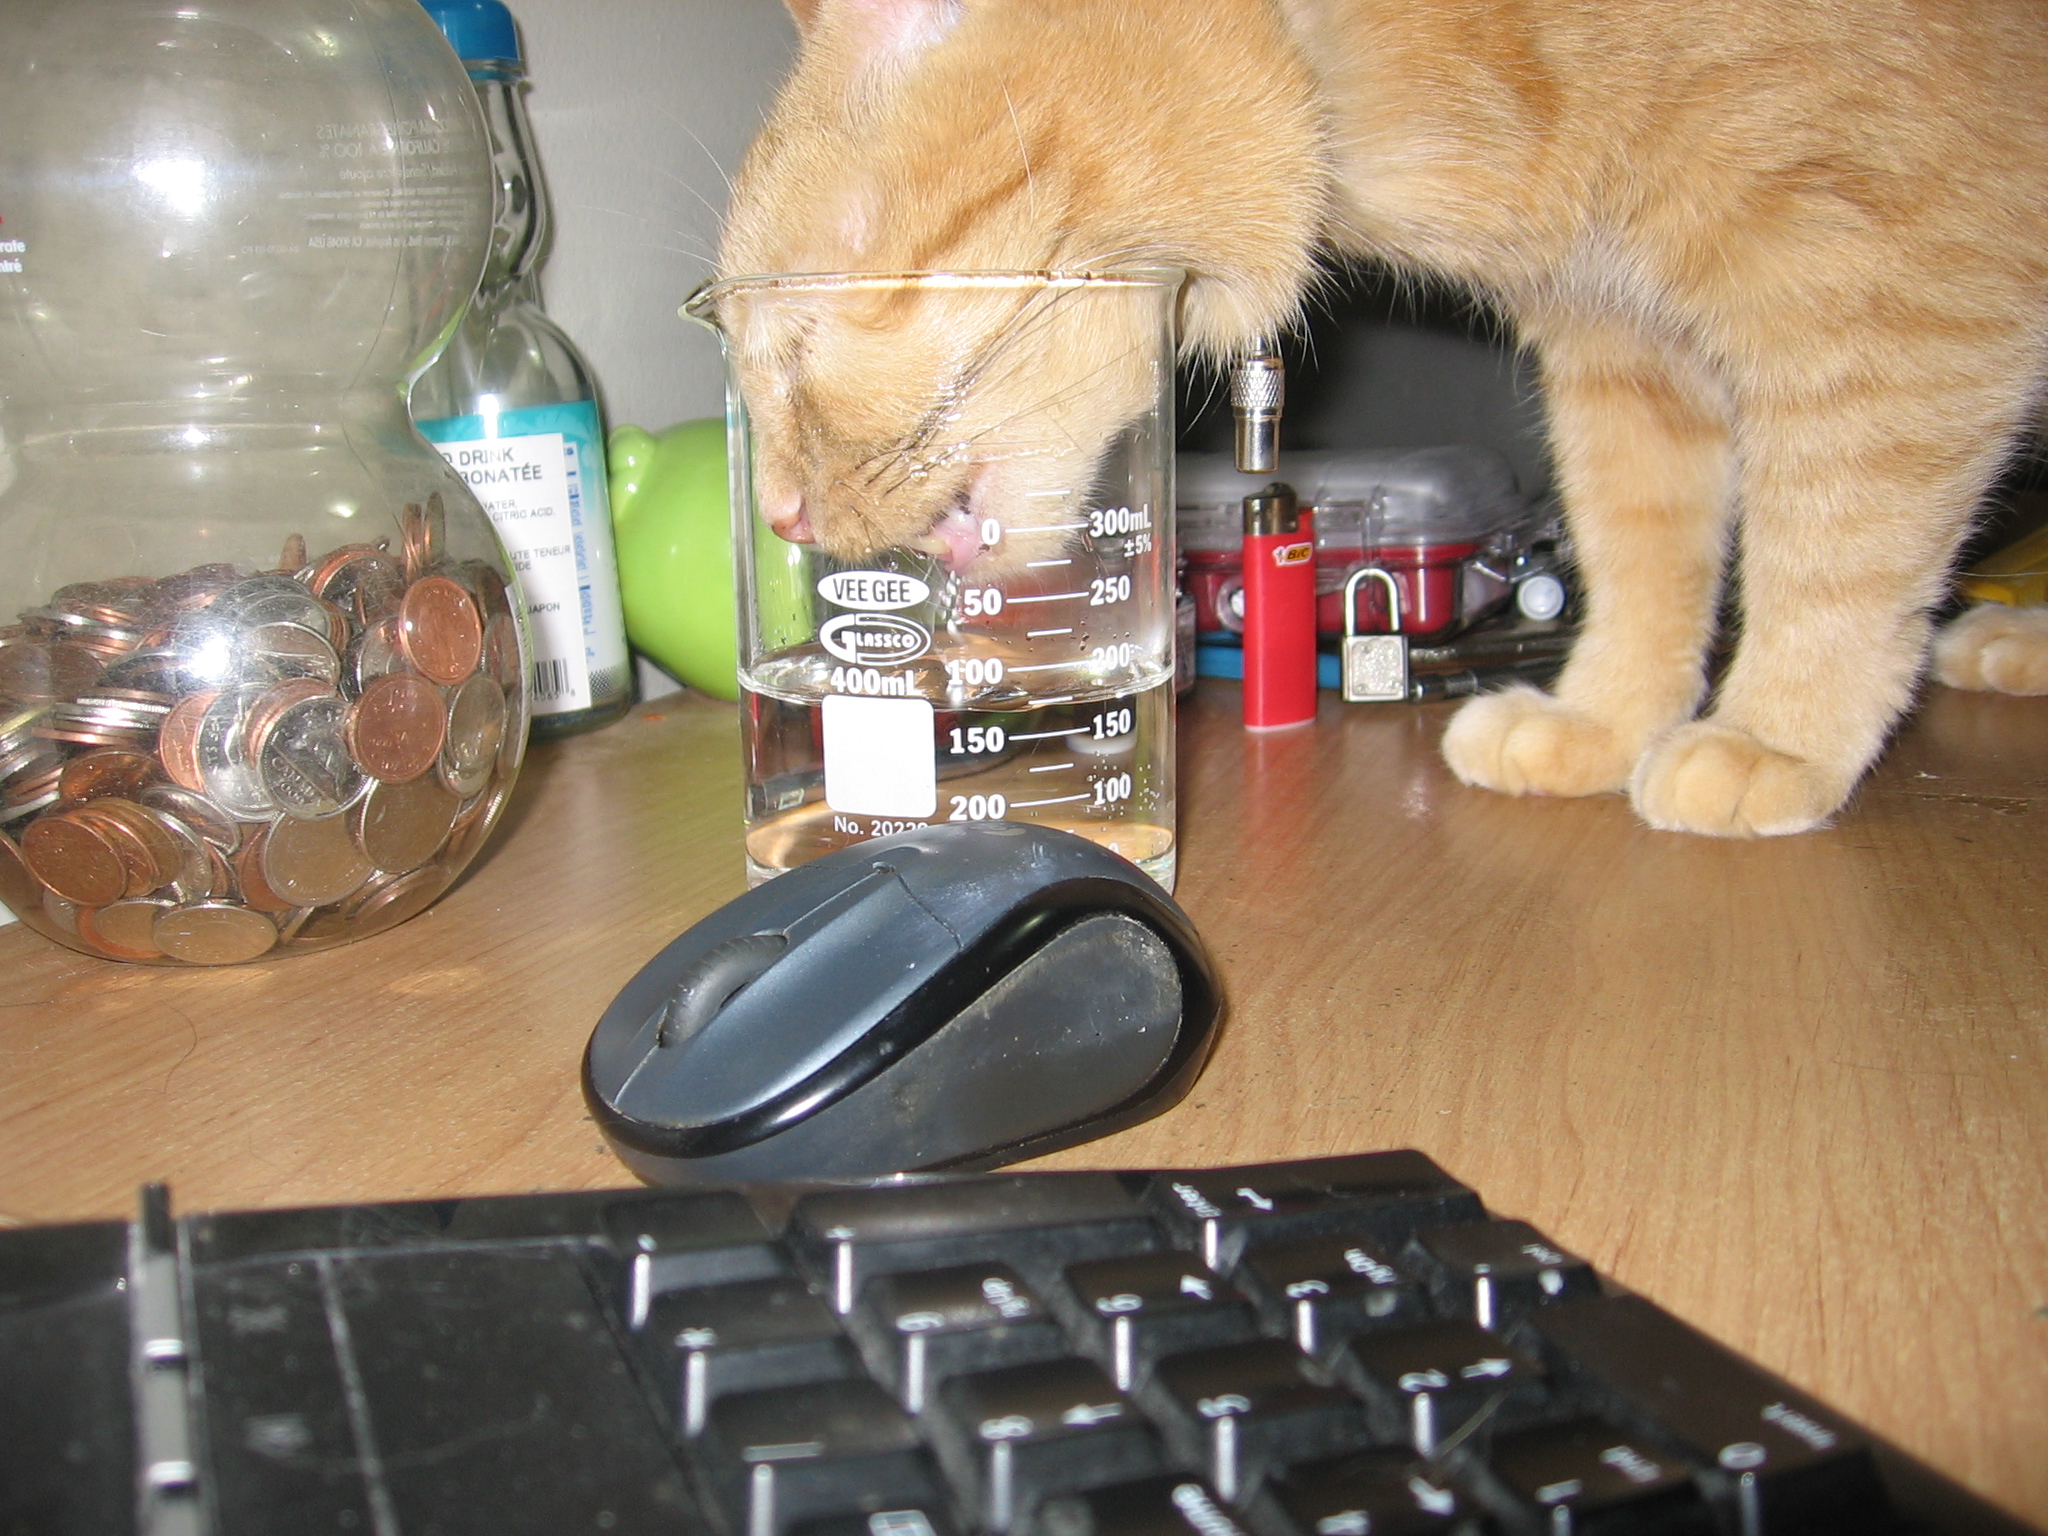 Another pic of Jack drinking water, a Pom juice contaner is holding loose change, and a keyboard and mouse are in the foreground.